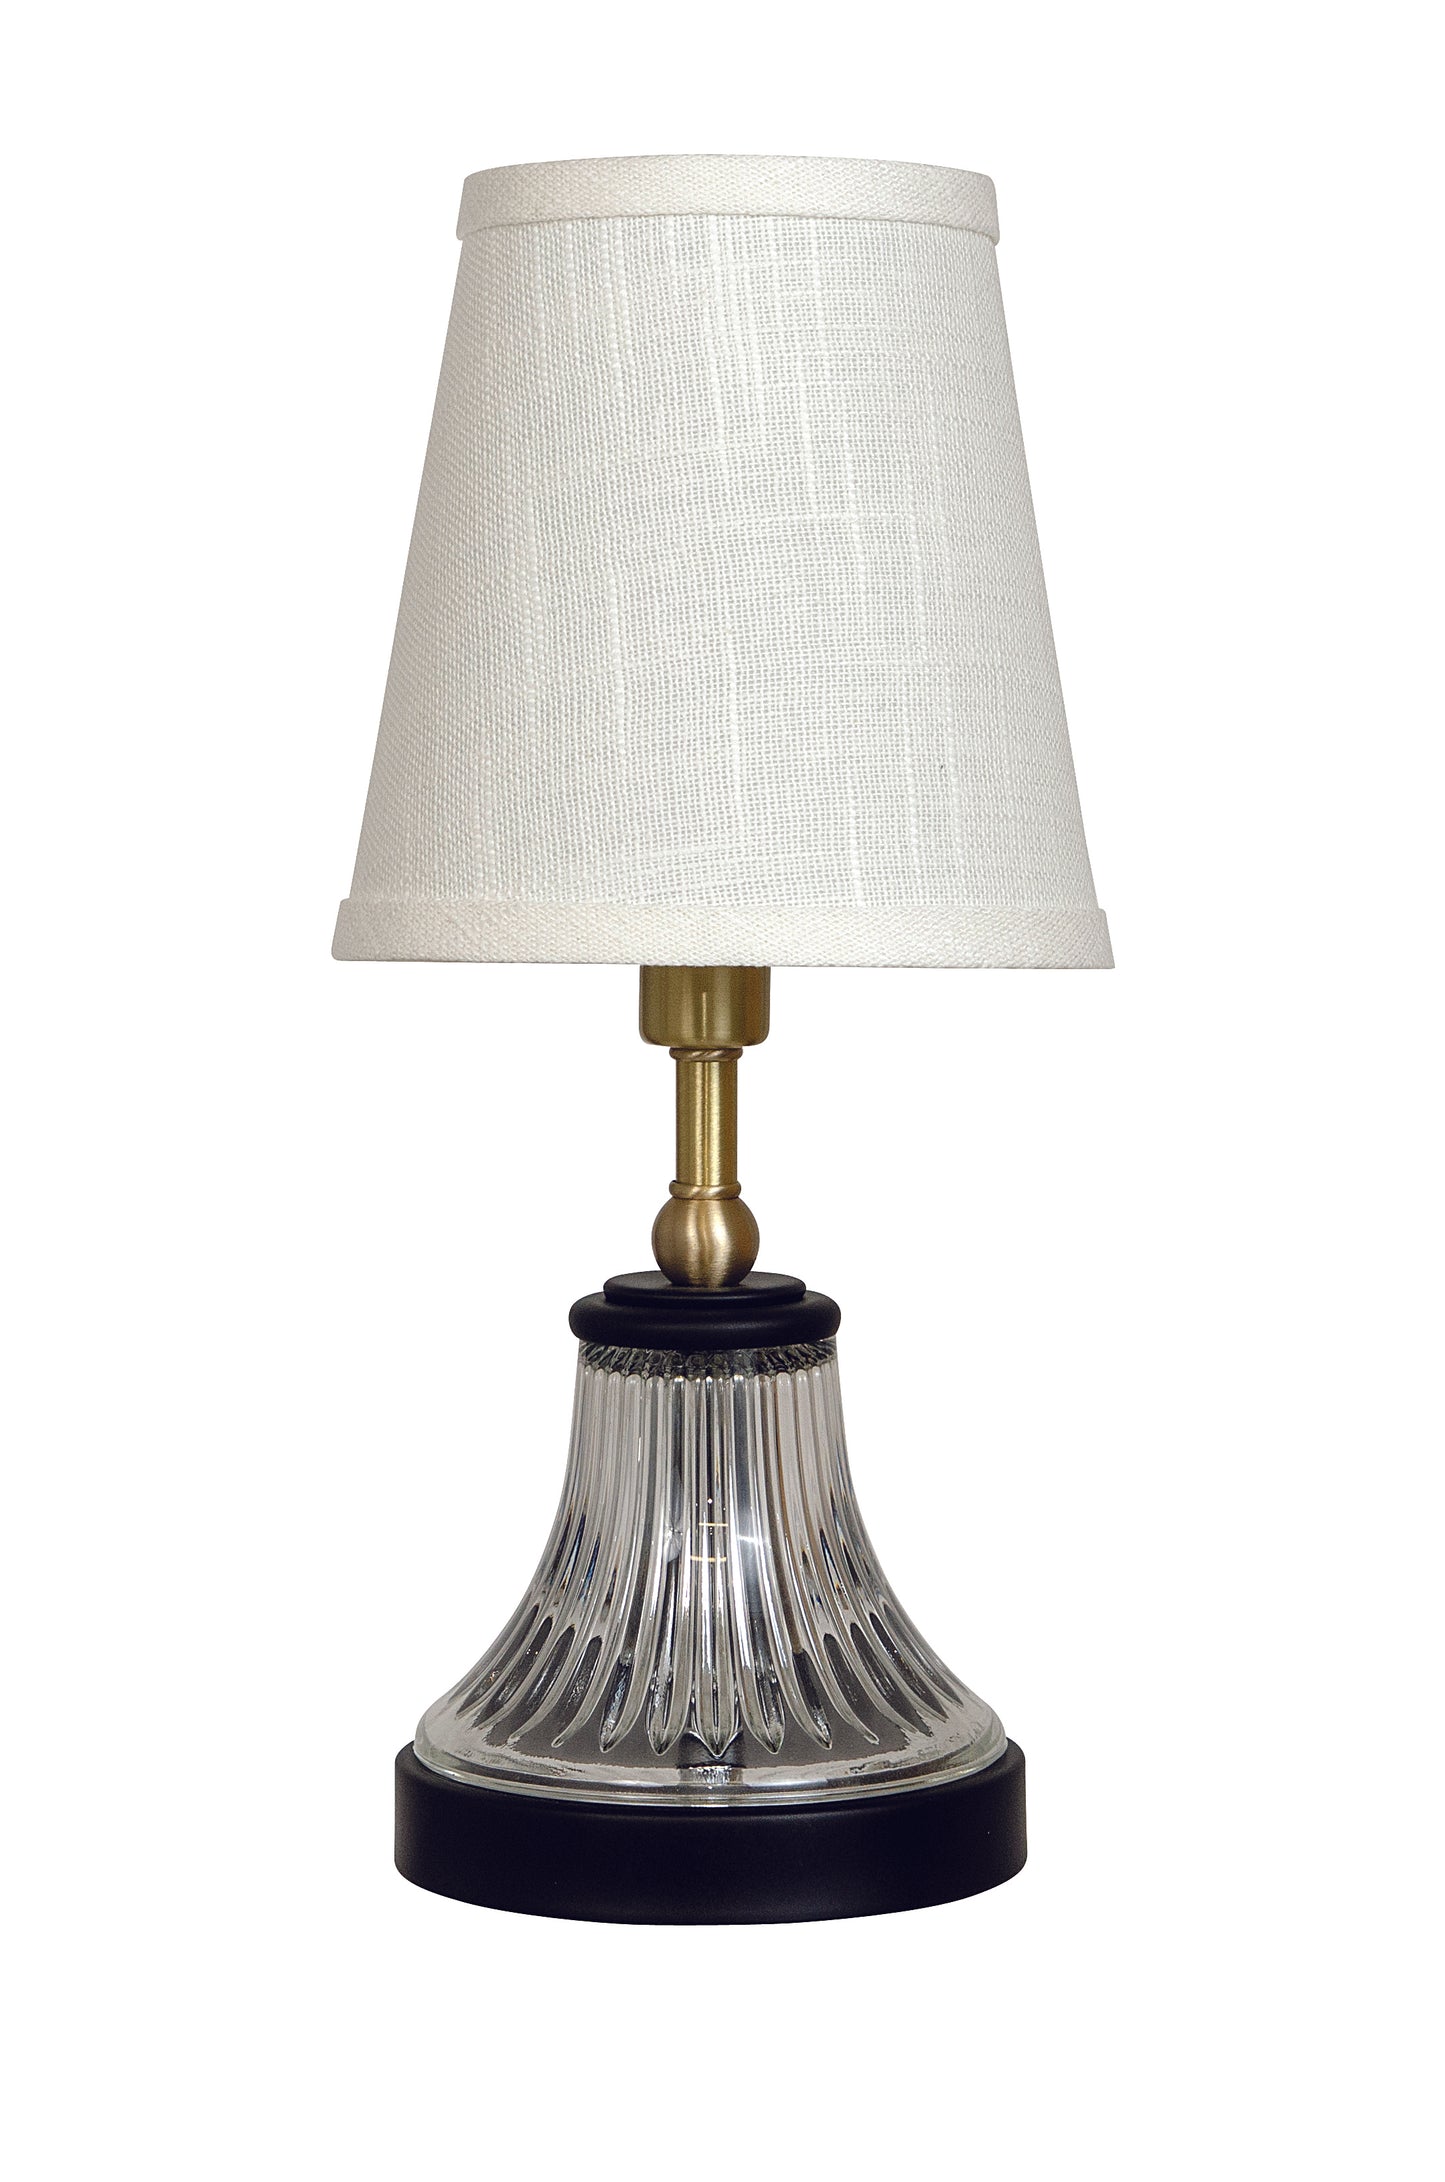 House of Troy Bryson Mini glass black and satin brass accent lamp B207-BLK/SB